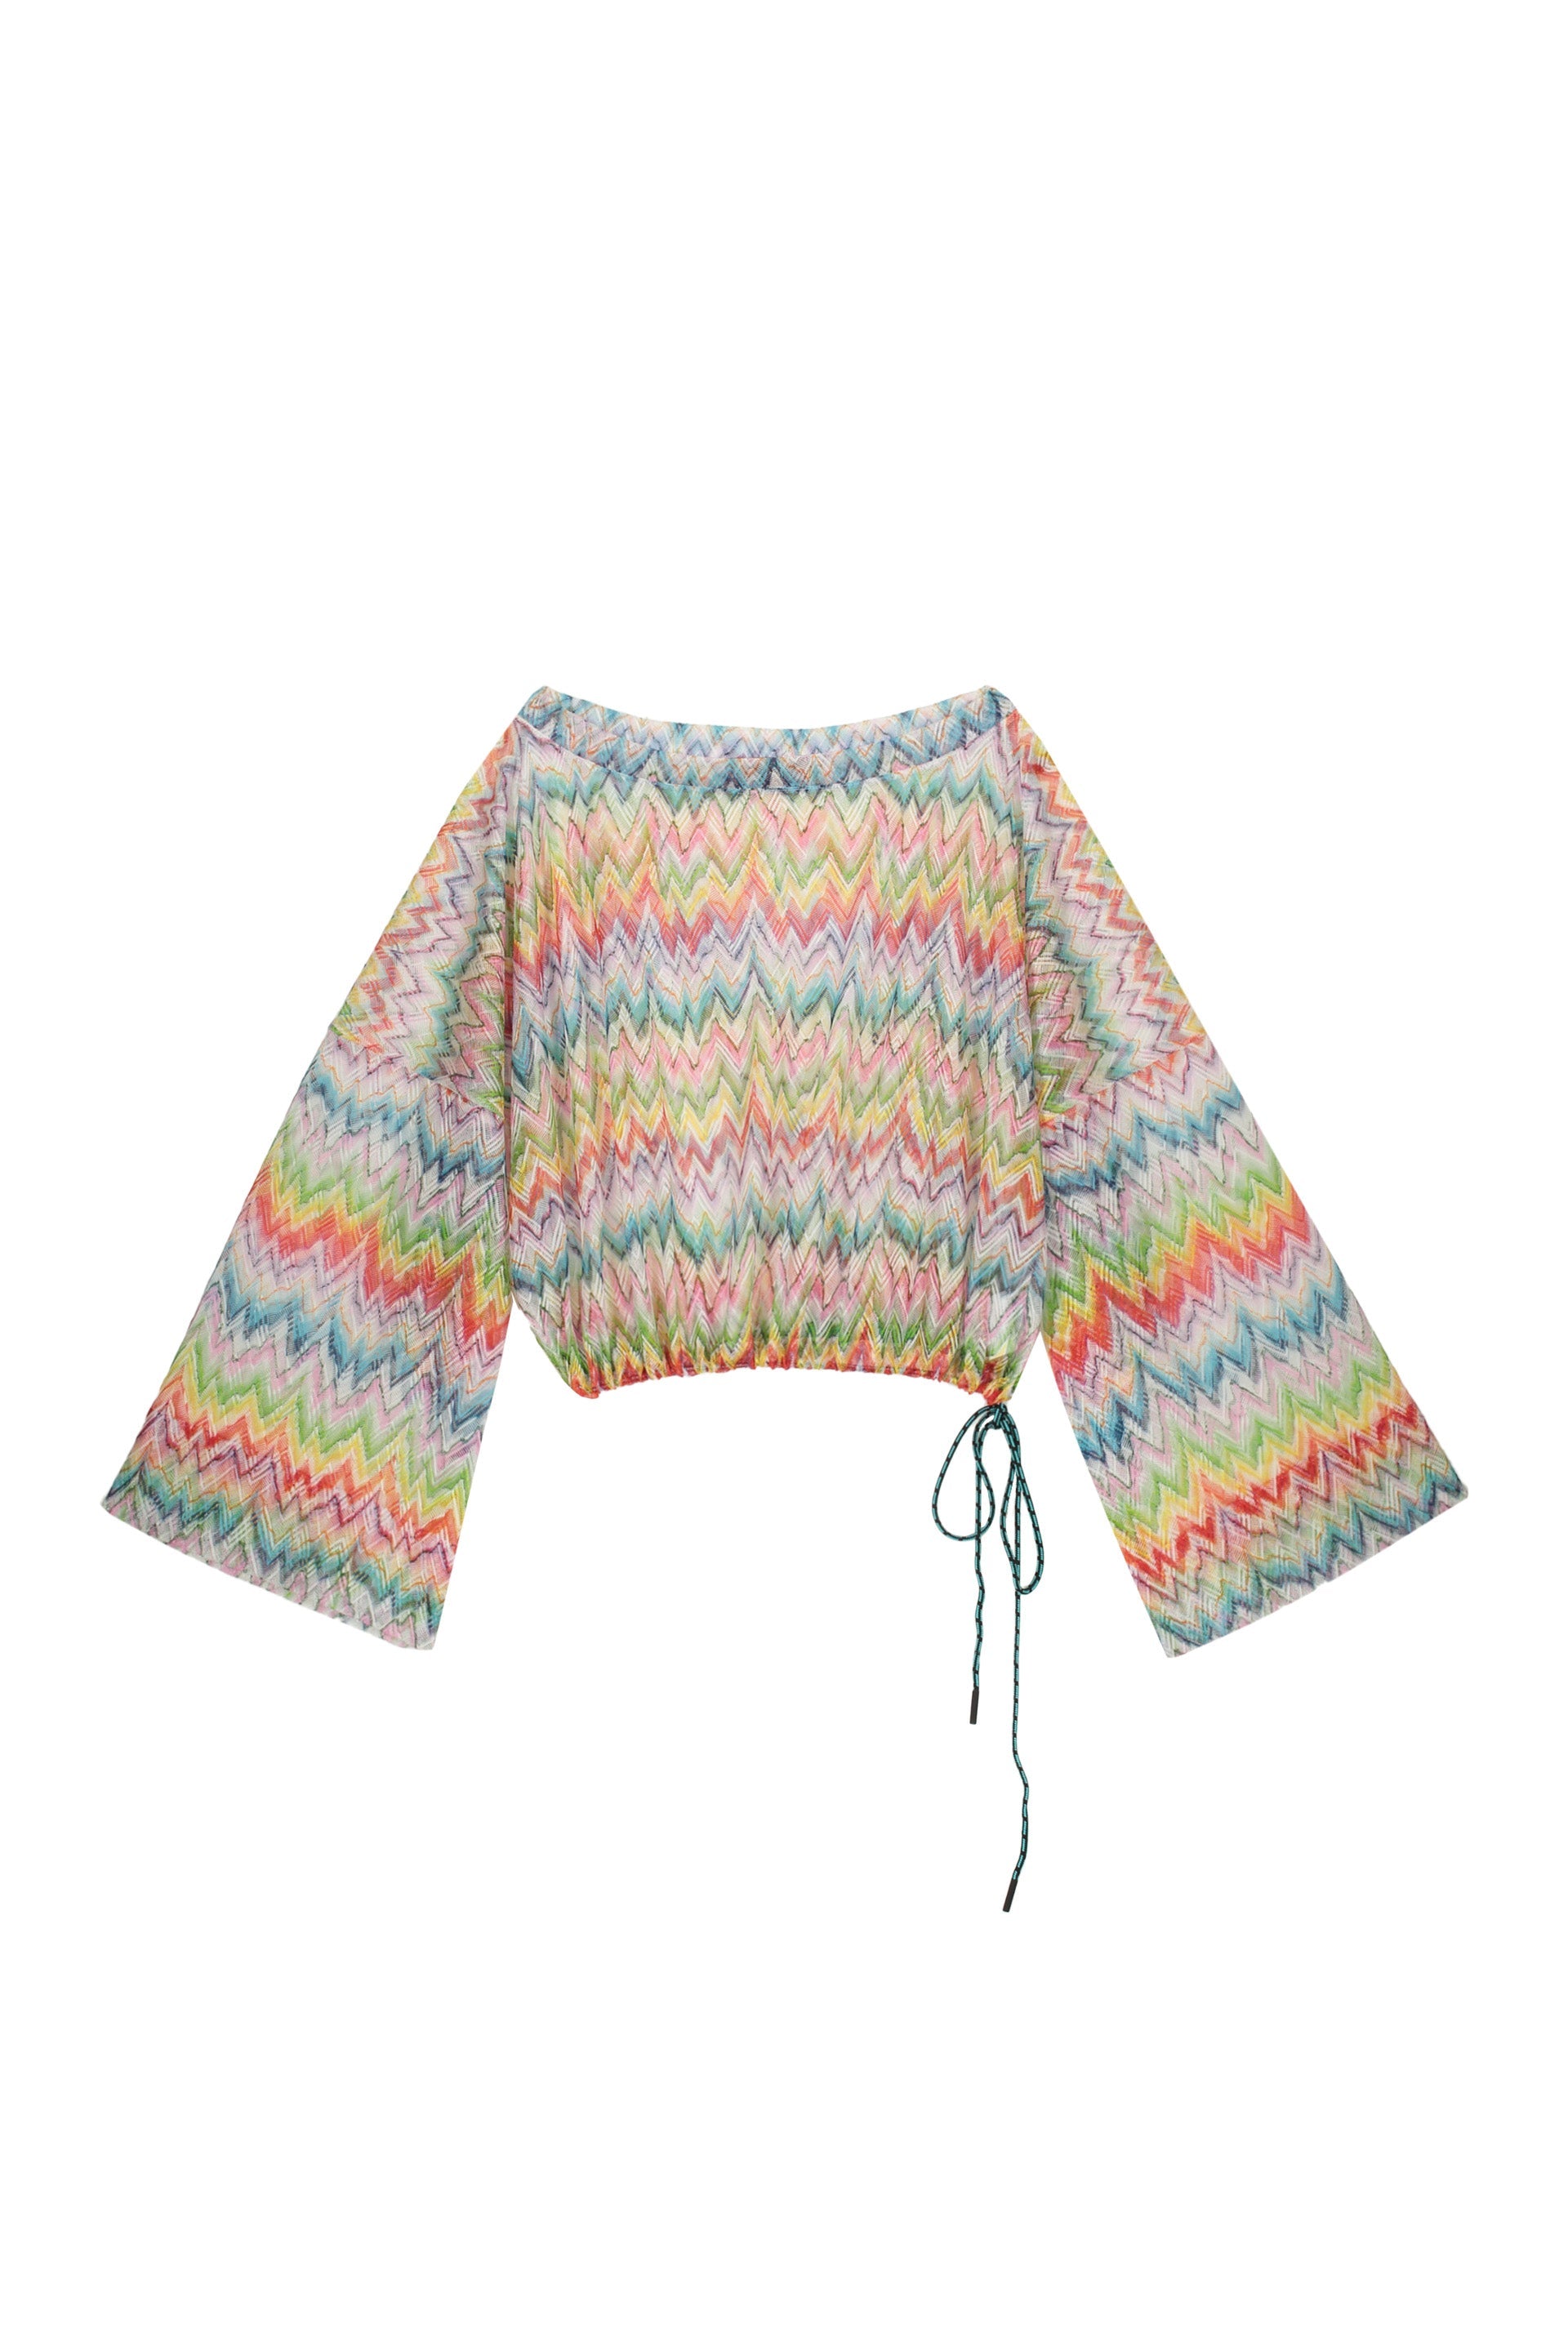 Missoni-OUTLET-SALE-Knitted-top-Shirts-42-ARCHIVE-COLLECTION.jpg